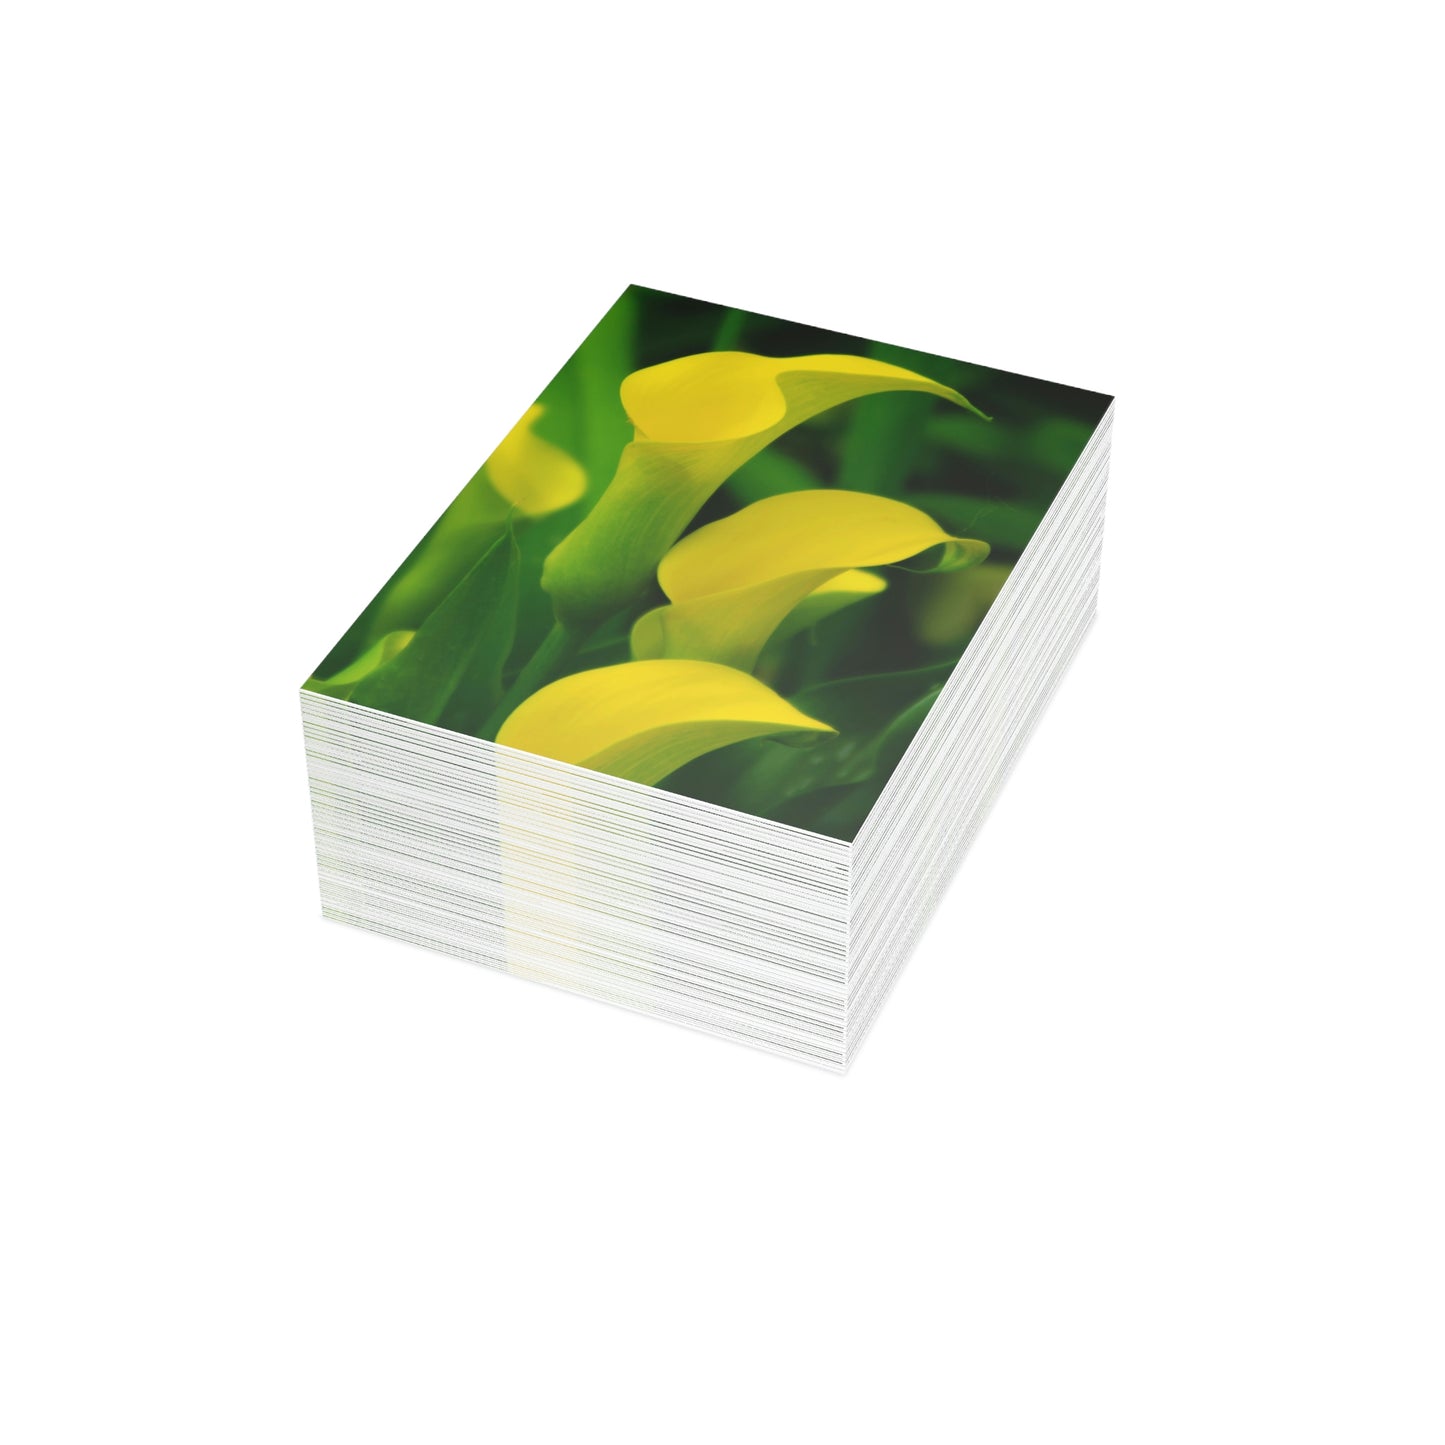 Flowers 33 Greeting Cards (1, 10, 30, and 50pcs)